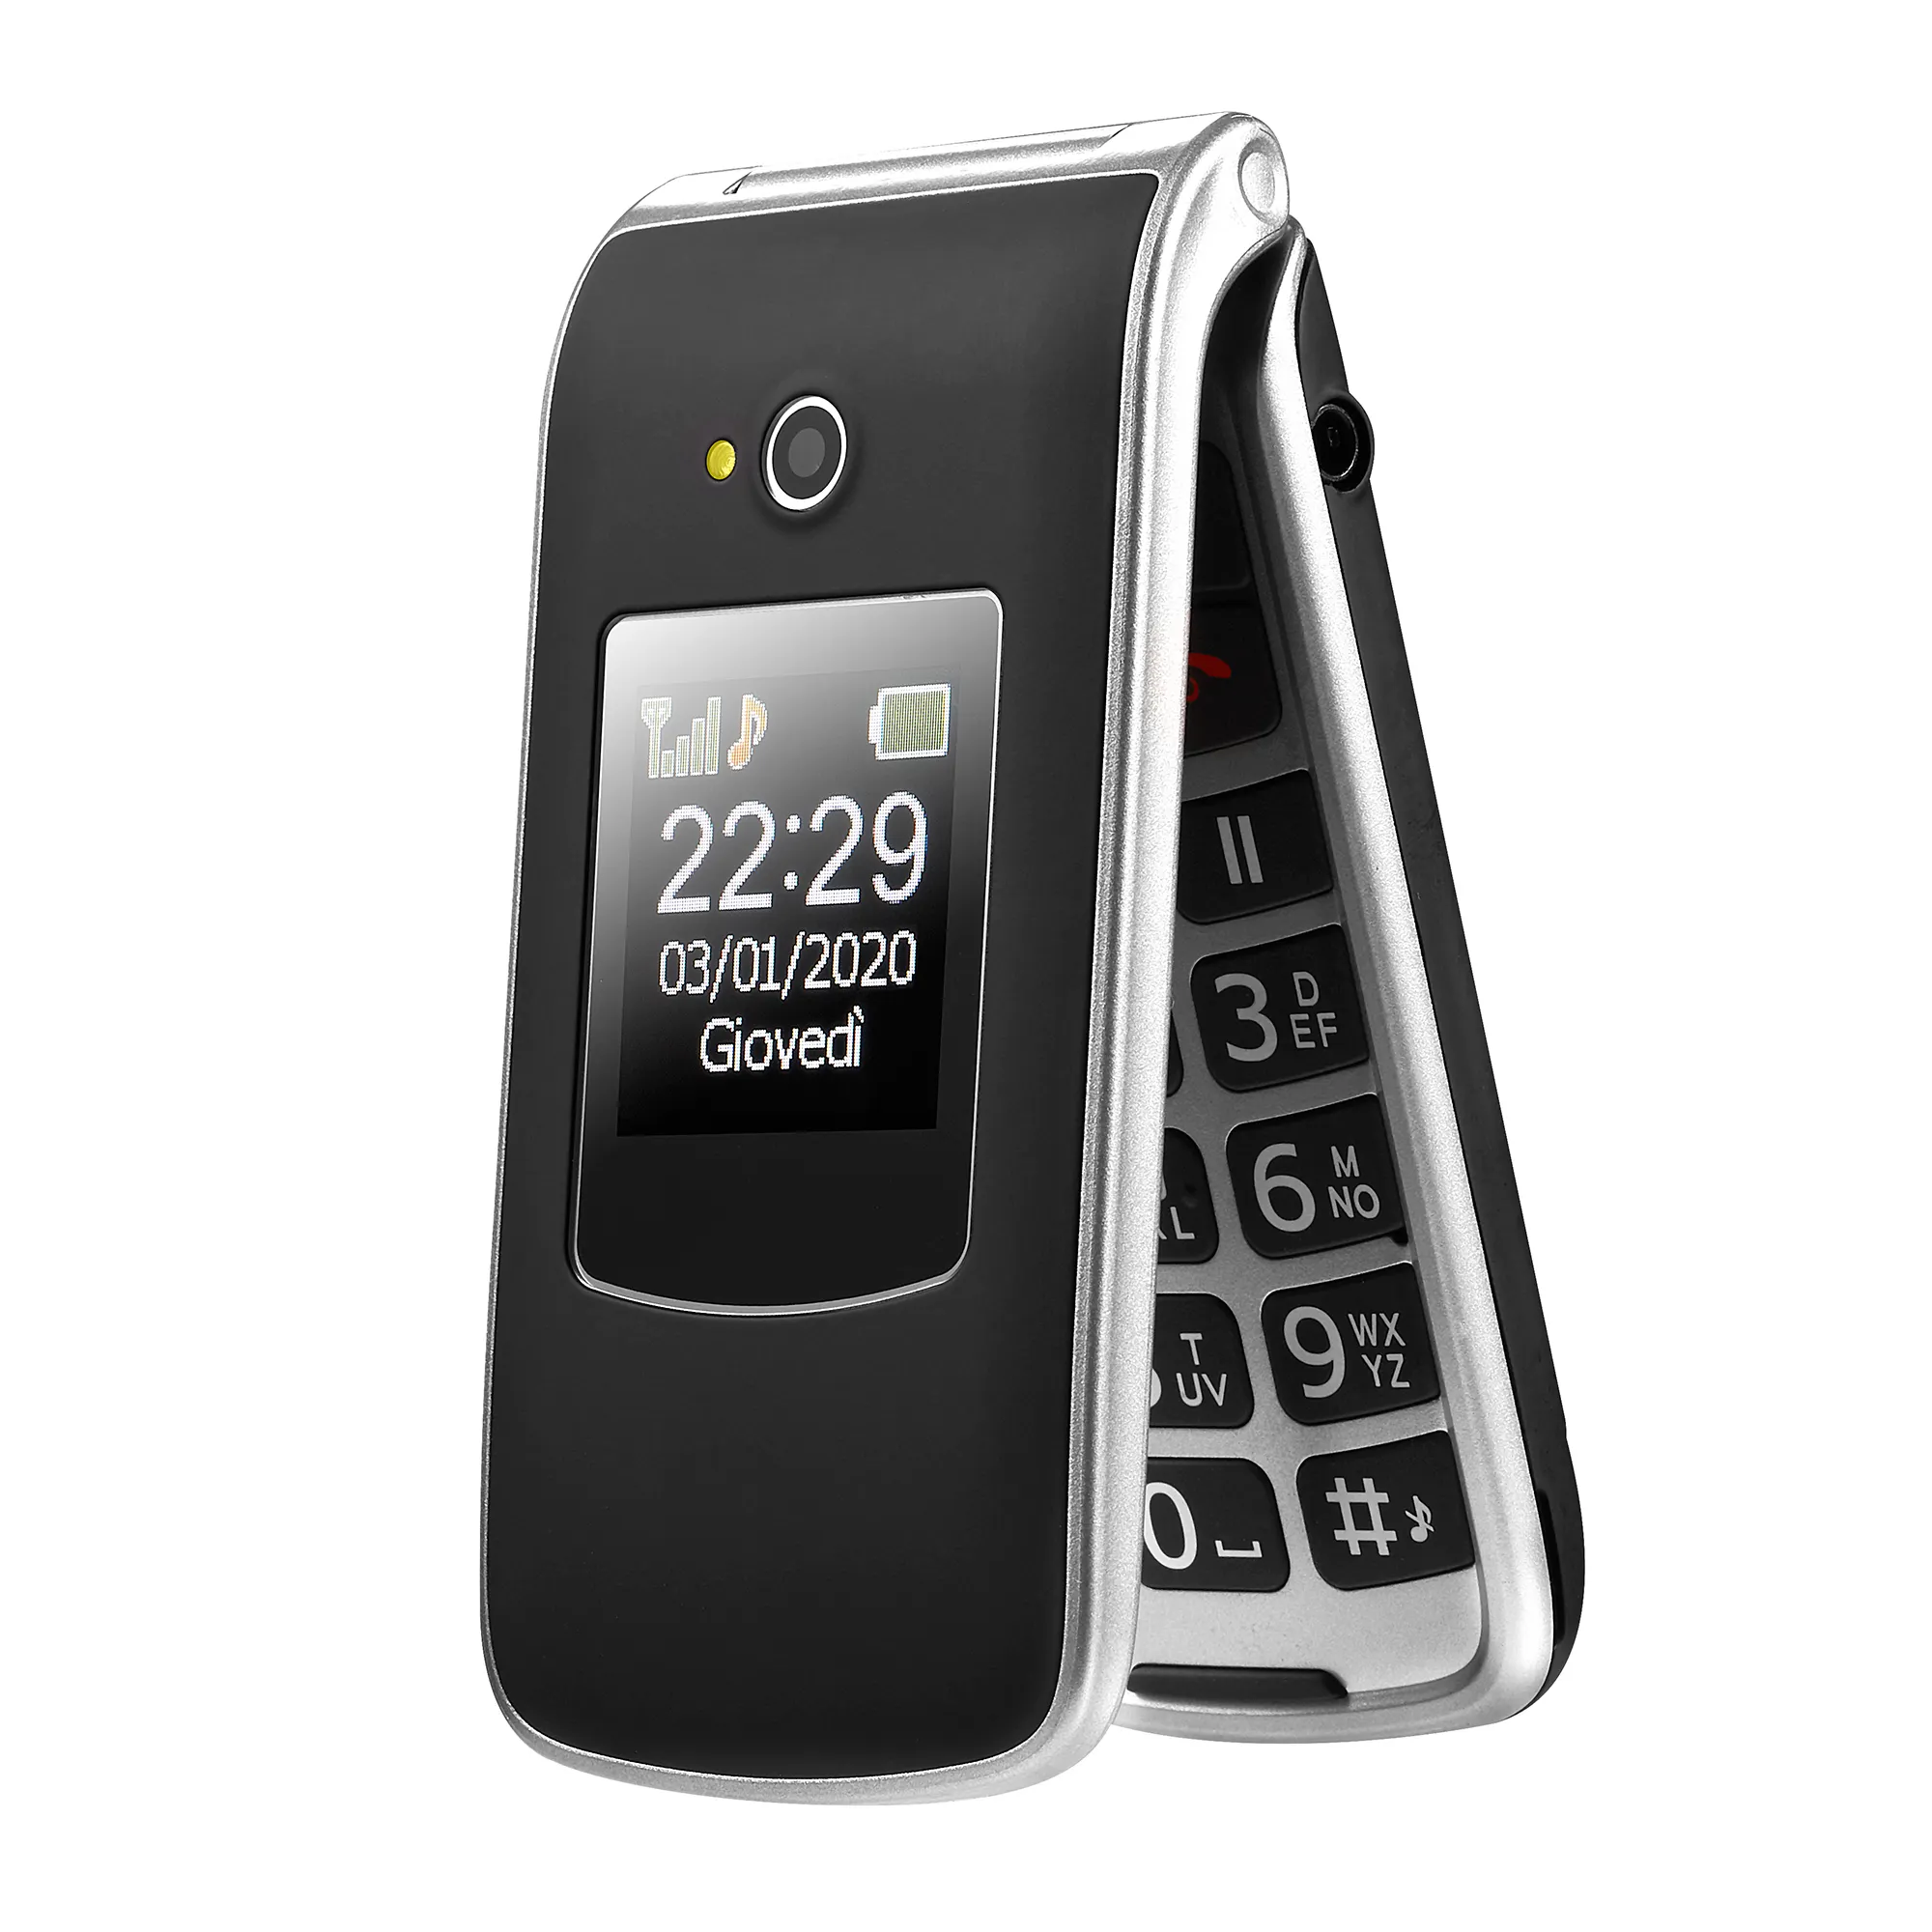 Wholesale Cheap unlocked cell phone 2.4 inch display flip senior gsm simple feature phone